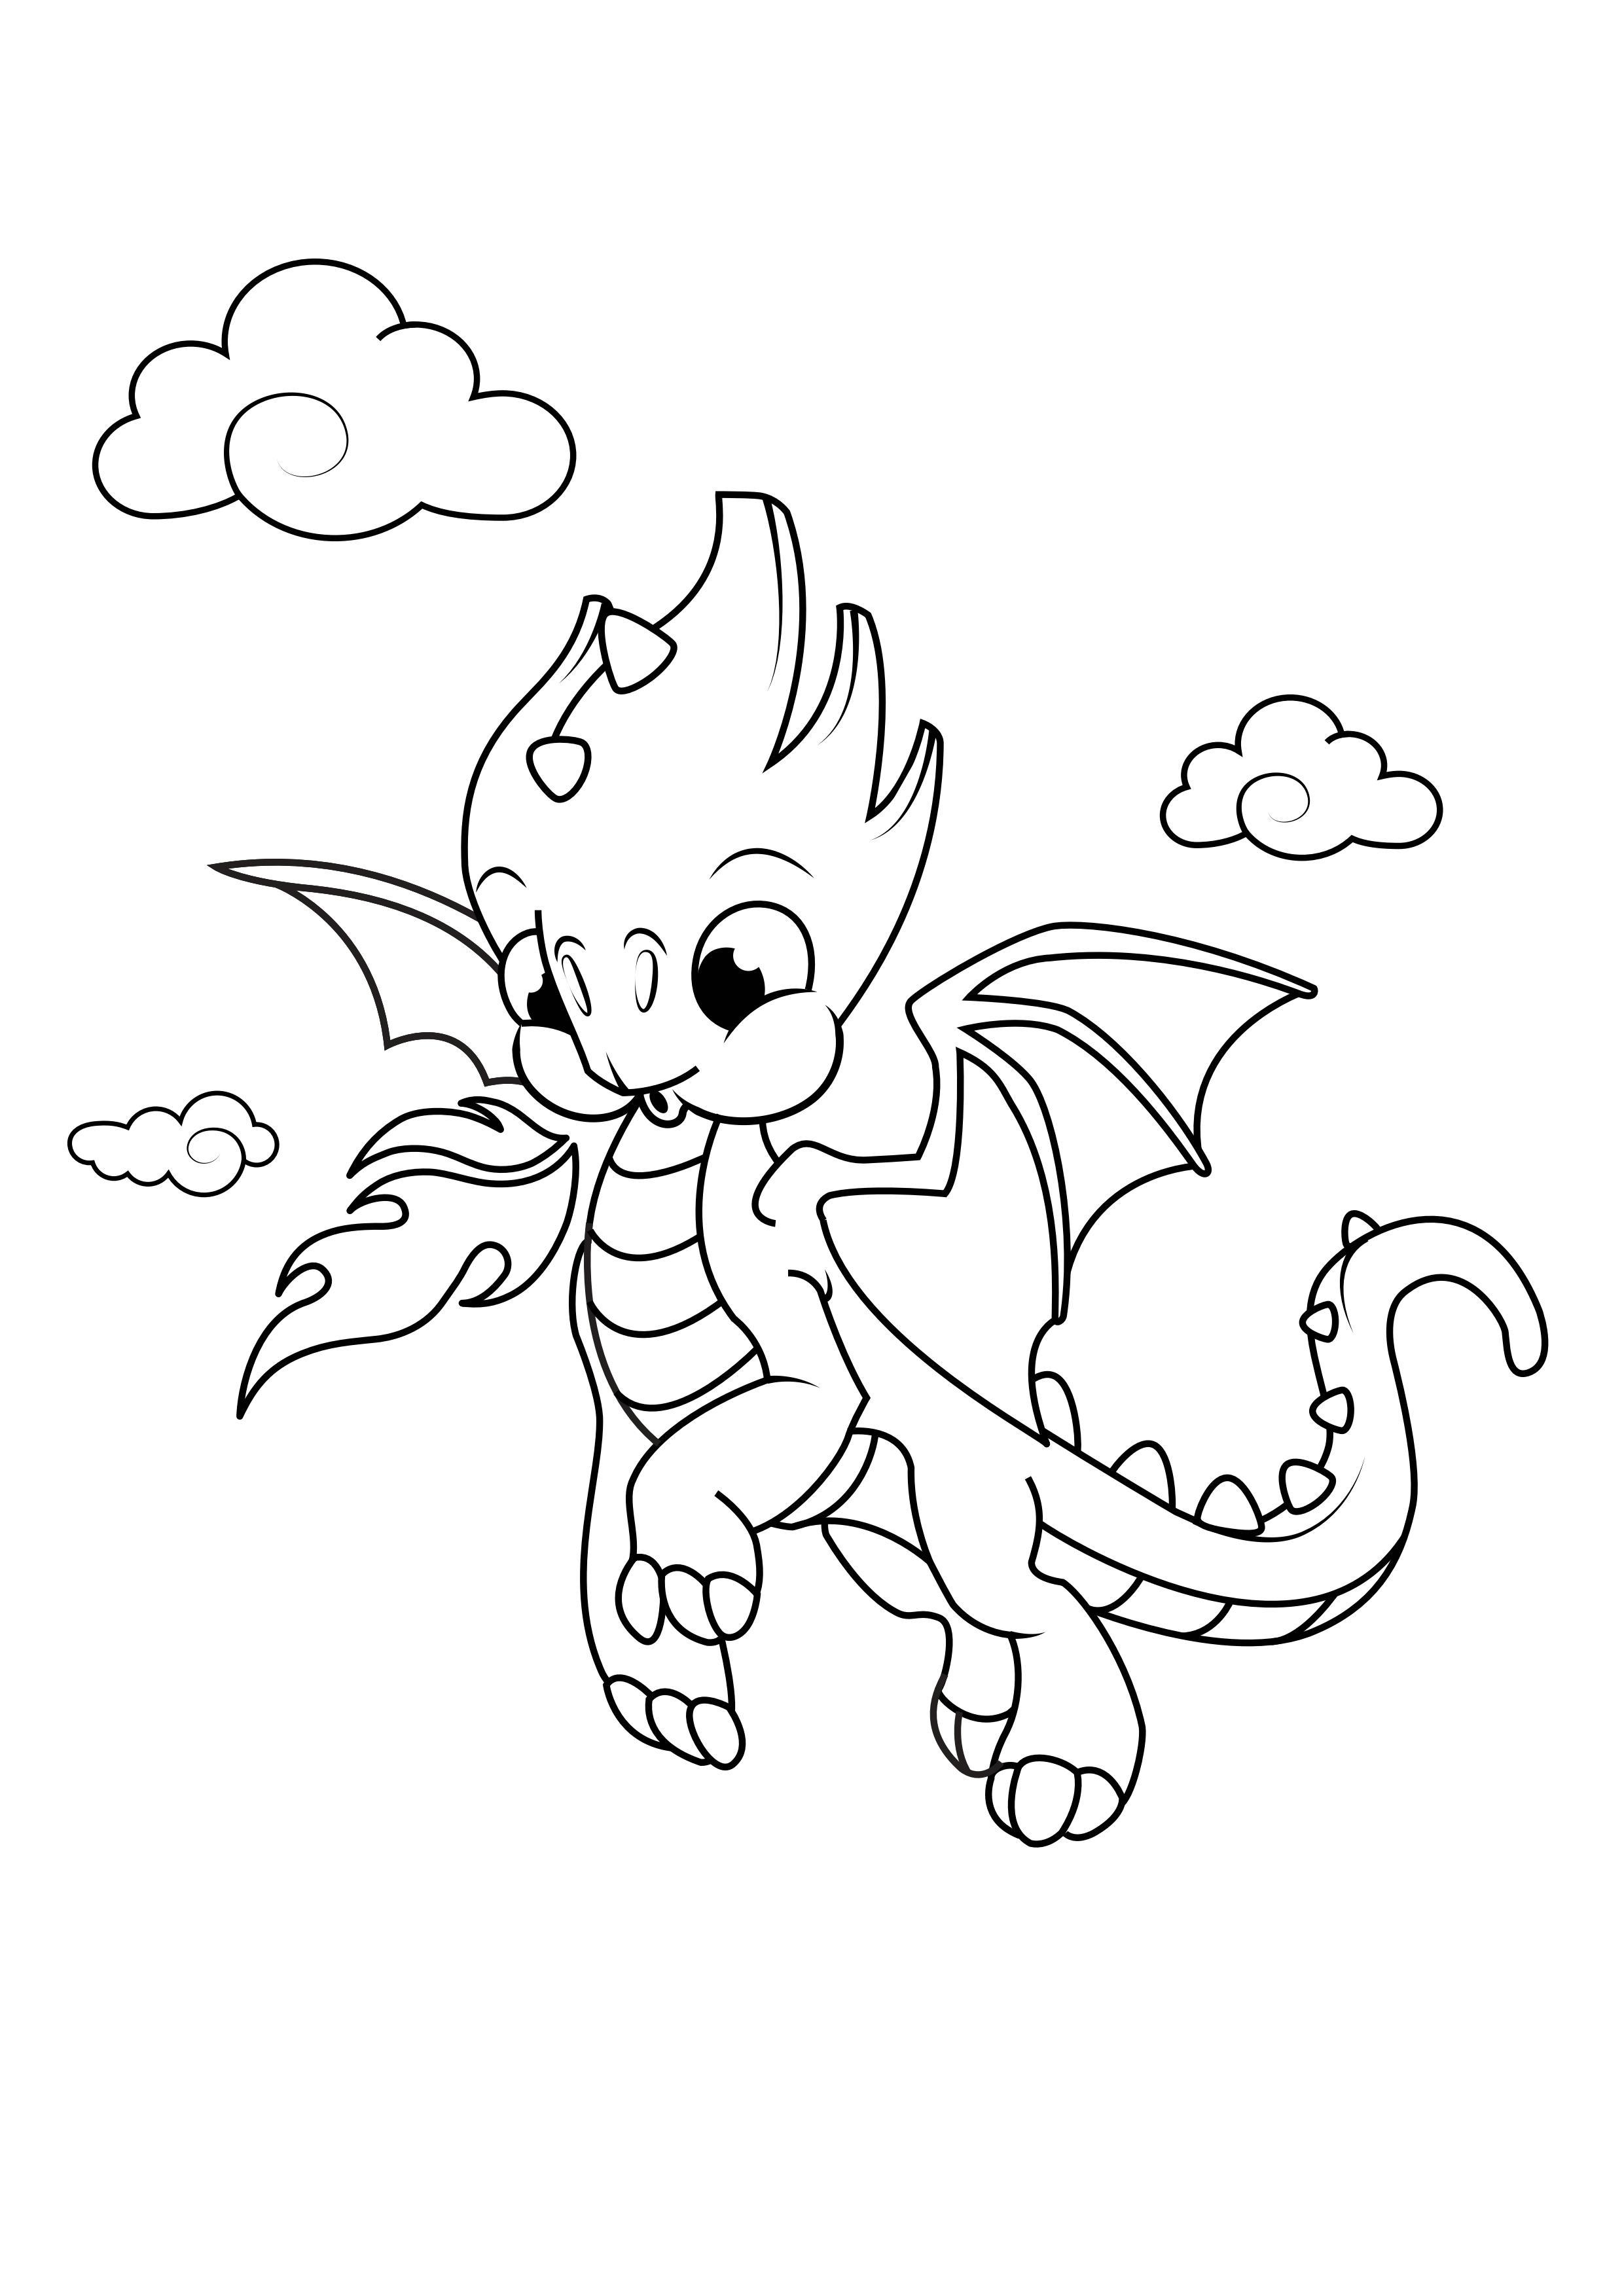 Coloring page dragon in the sky